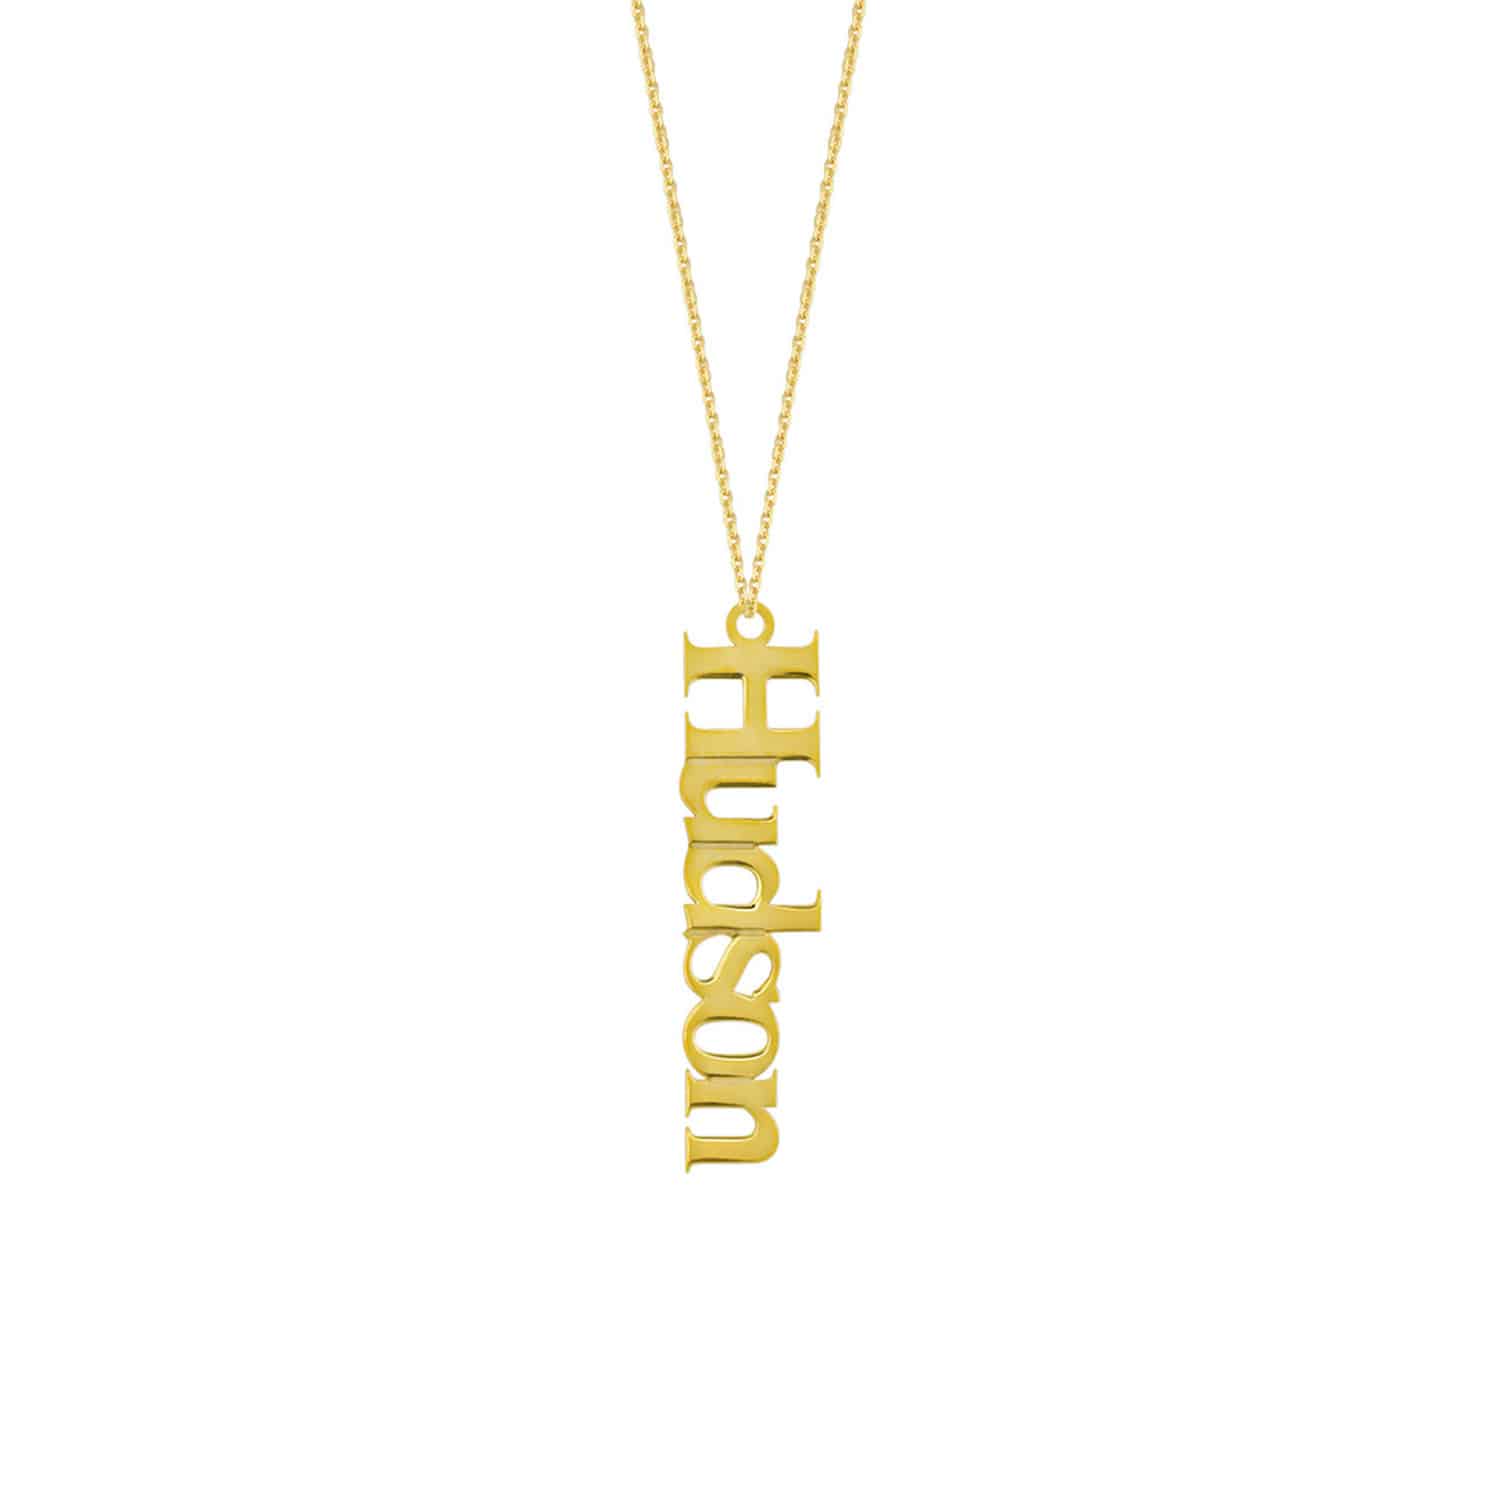 Customizable 14K Gold Yellow White Rose Vertical Nameplate Pendant Necklace - Yellow Gold, 16"-18" Adjustable